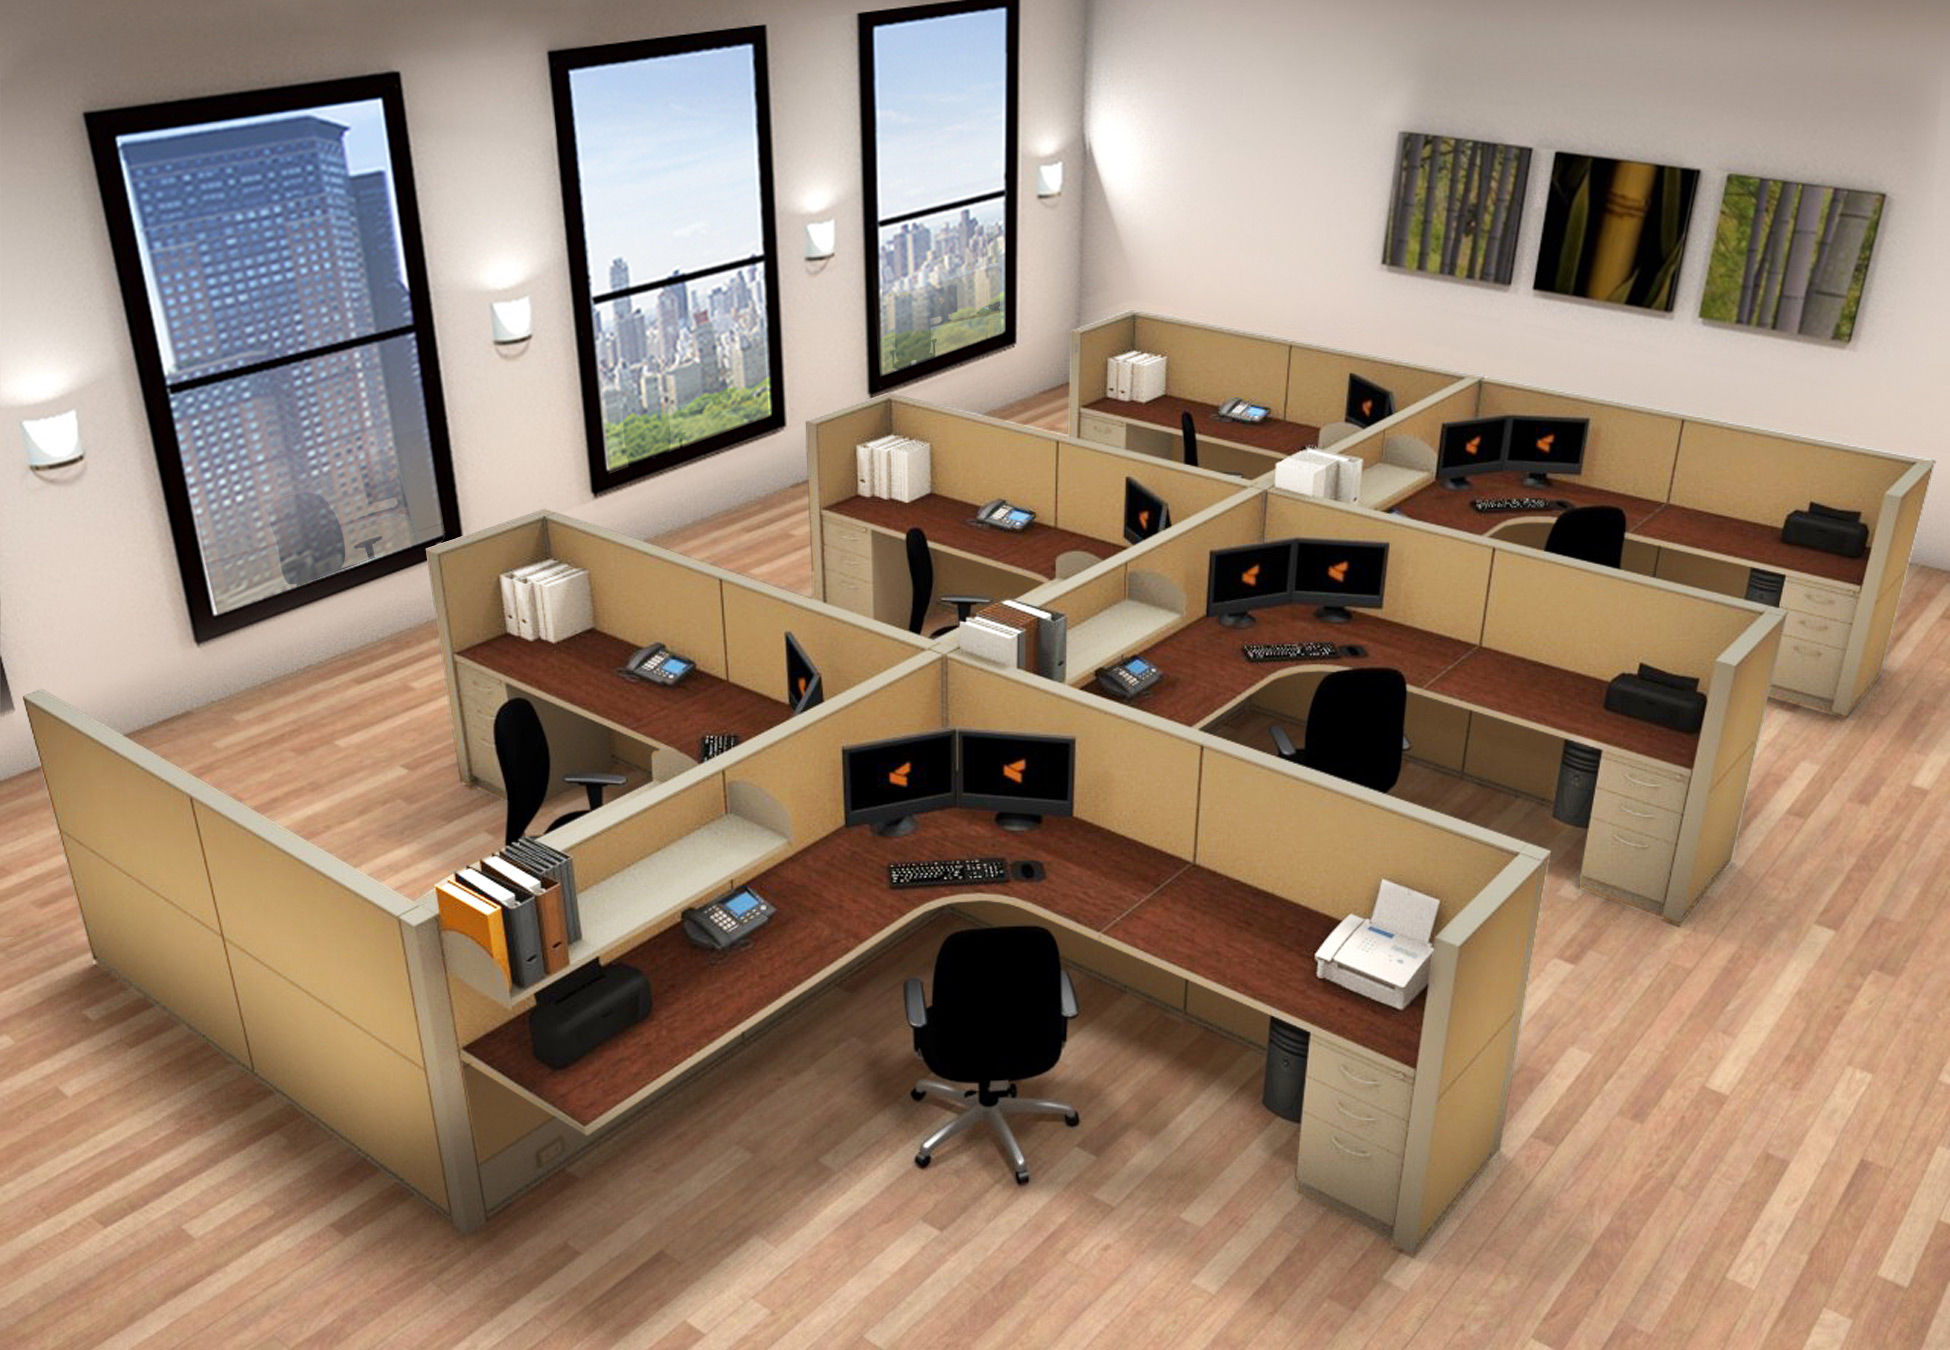 8x8 Cubicle Workstations from AIS - 6 Pack Cluster